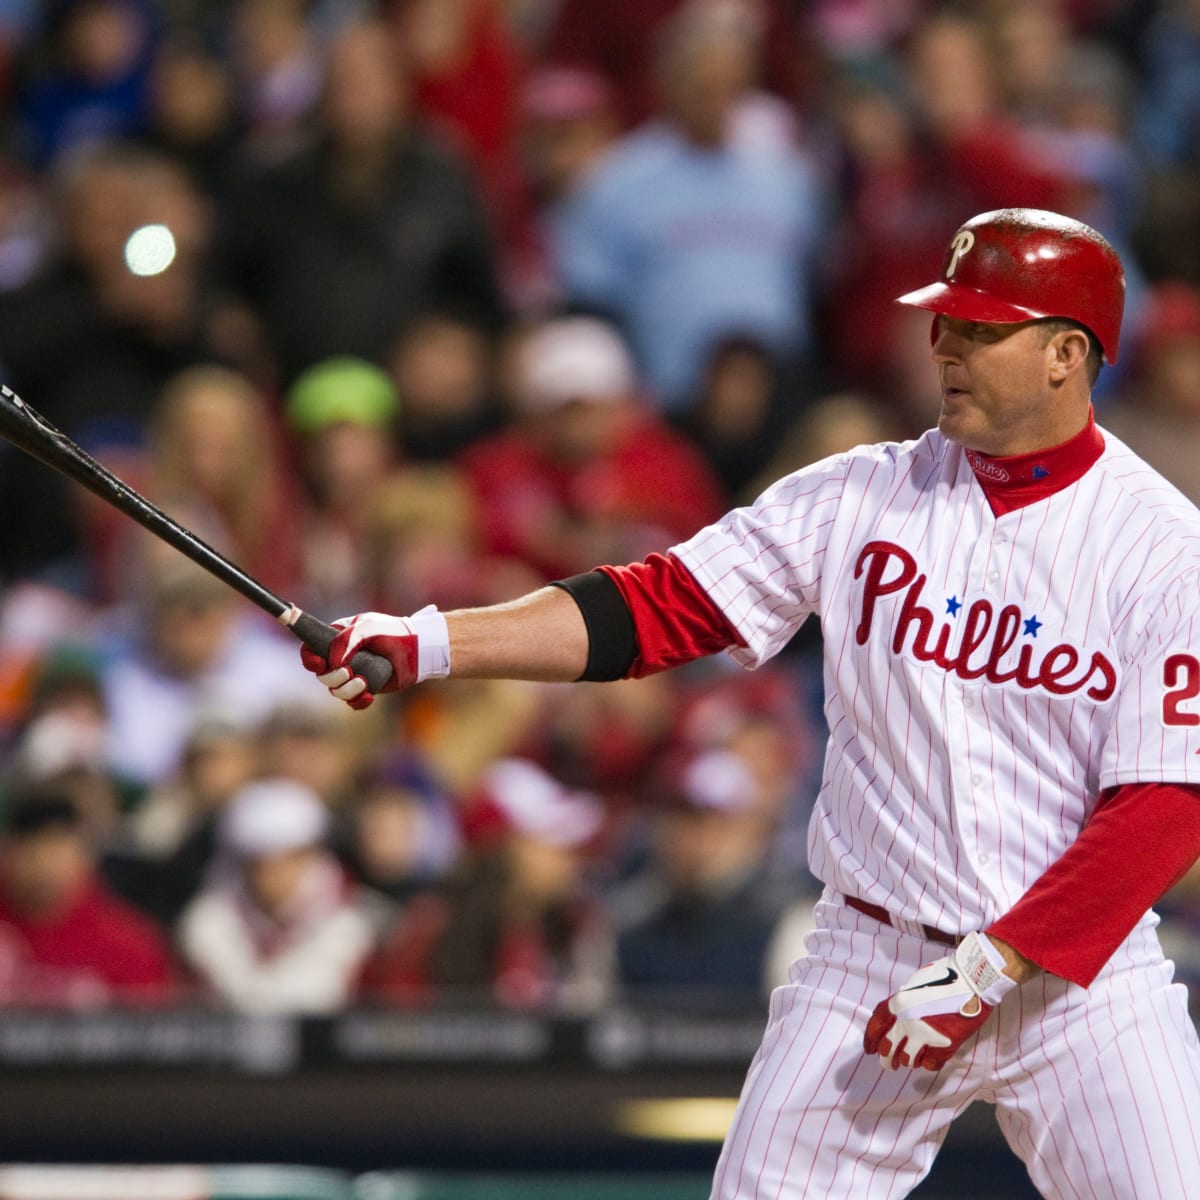 Inside the Phillies: Time for Phillies to bring back Aaron Rowand?